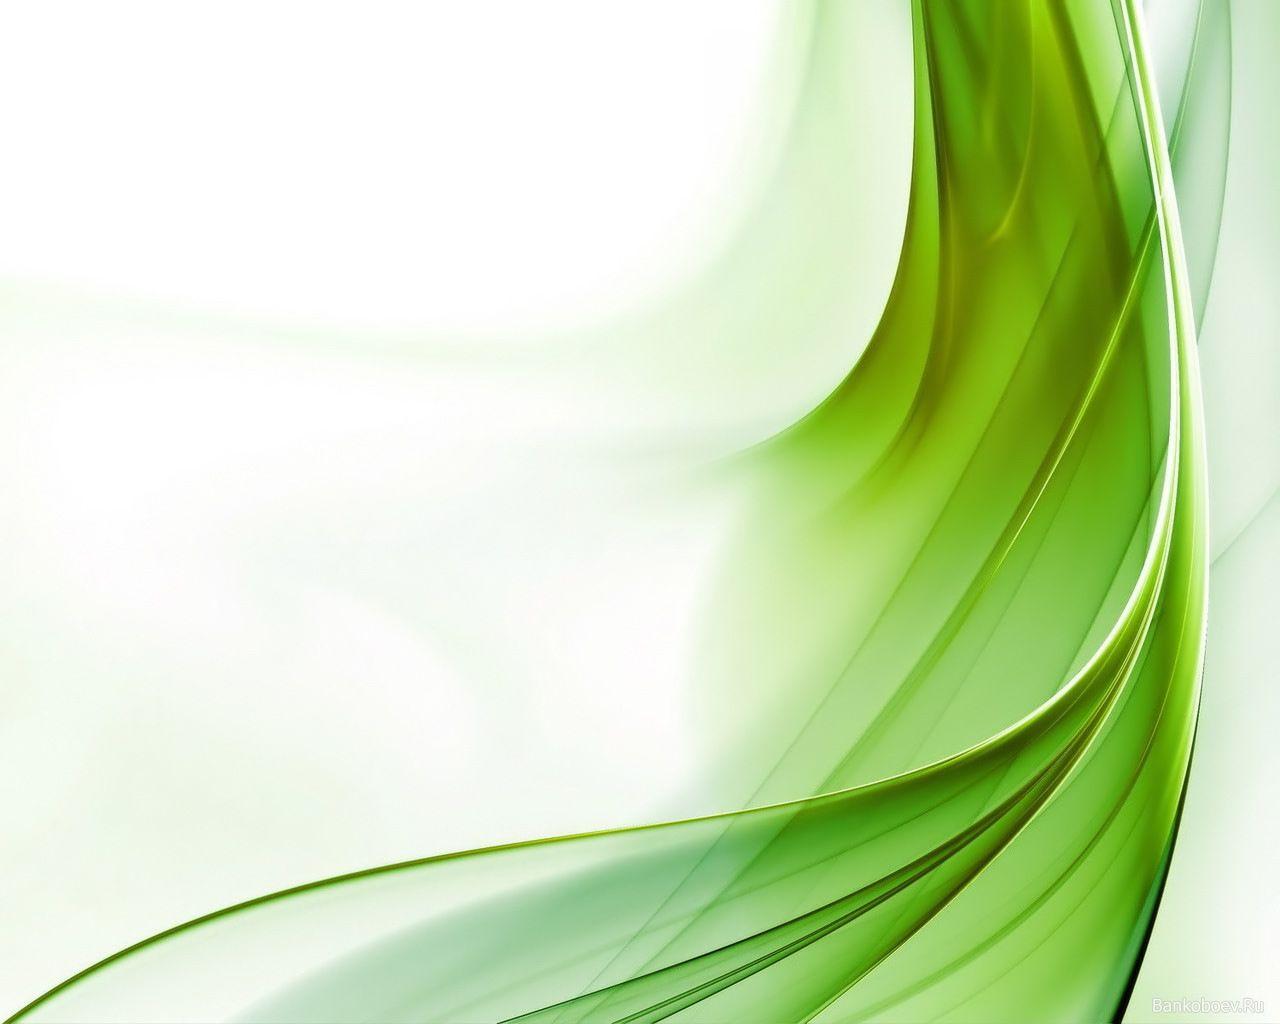 Green wave abstract background for powerpoint. Black